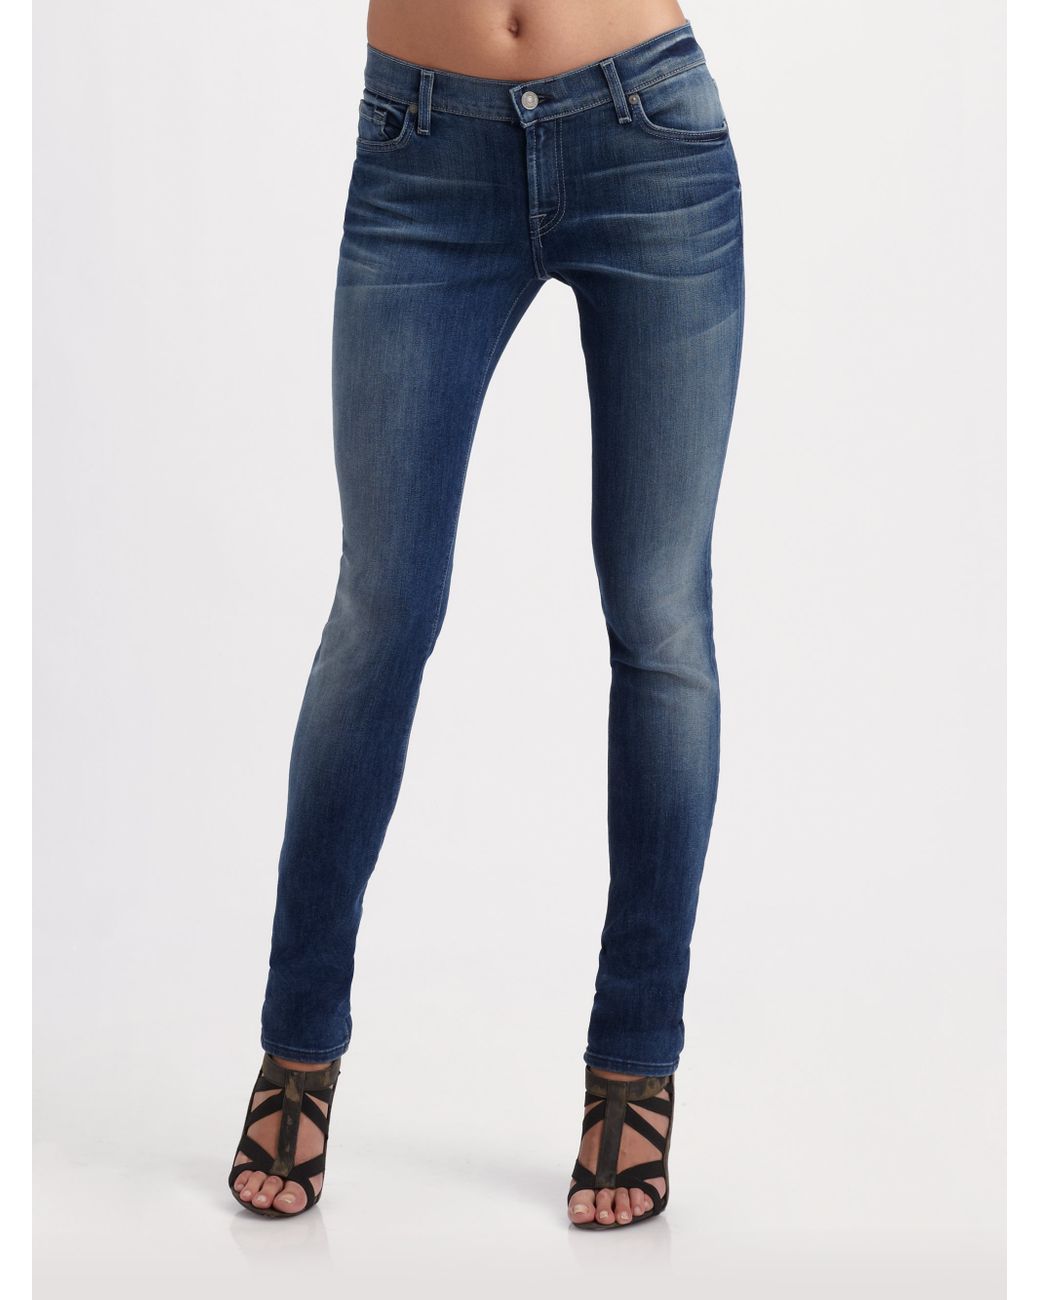 7 For All Mankind Roxanne Skinny Jeans in Blue | Lyst